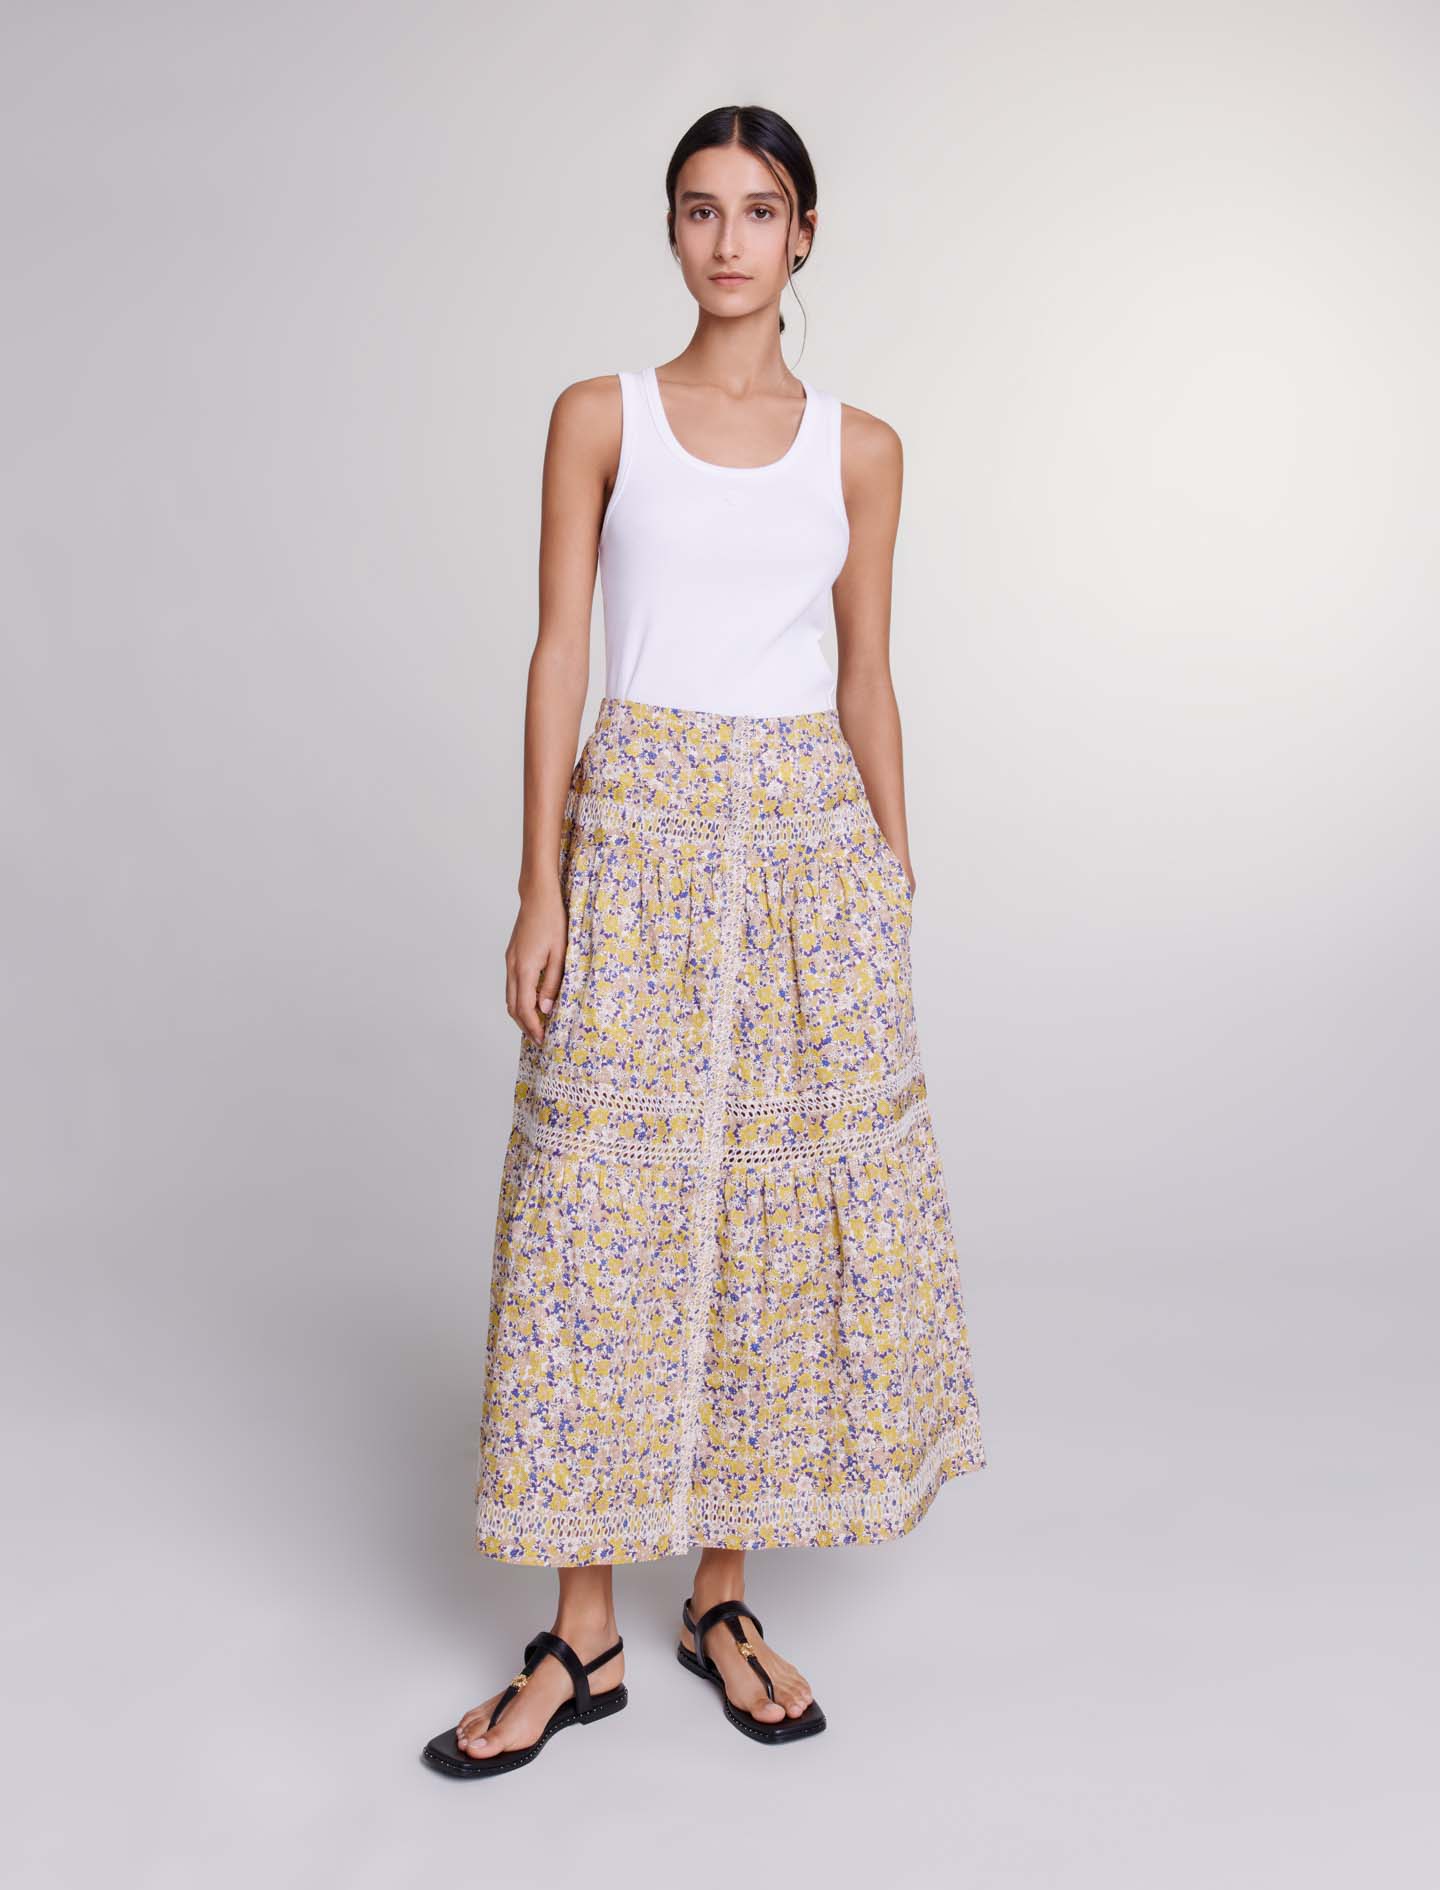 Maje Woman's cotton Embroidery: Long floral embroidered skirt, in color Embroided Flowers Beige Print /